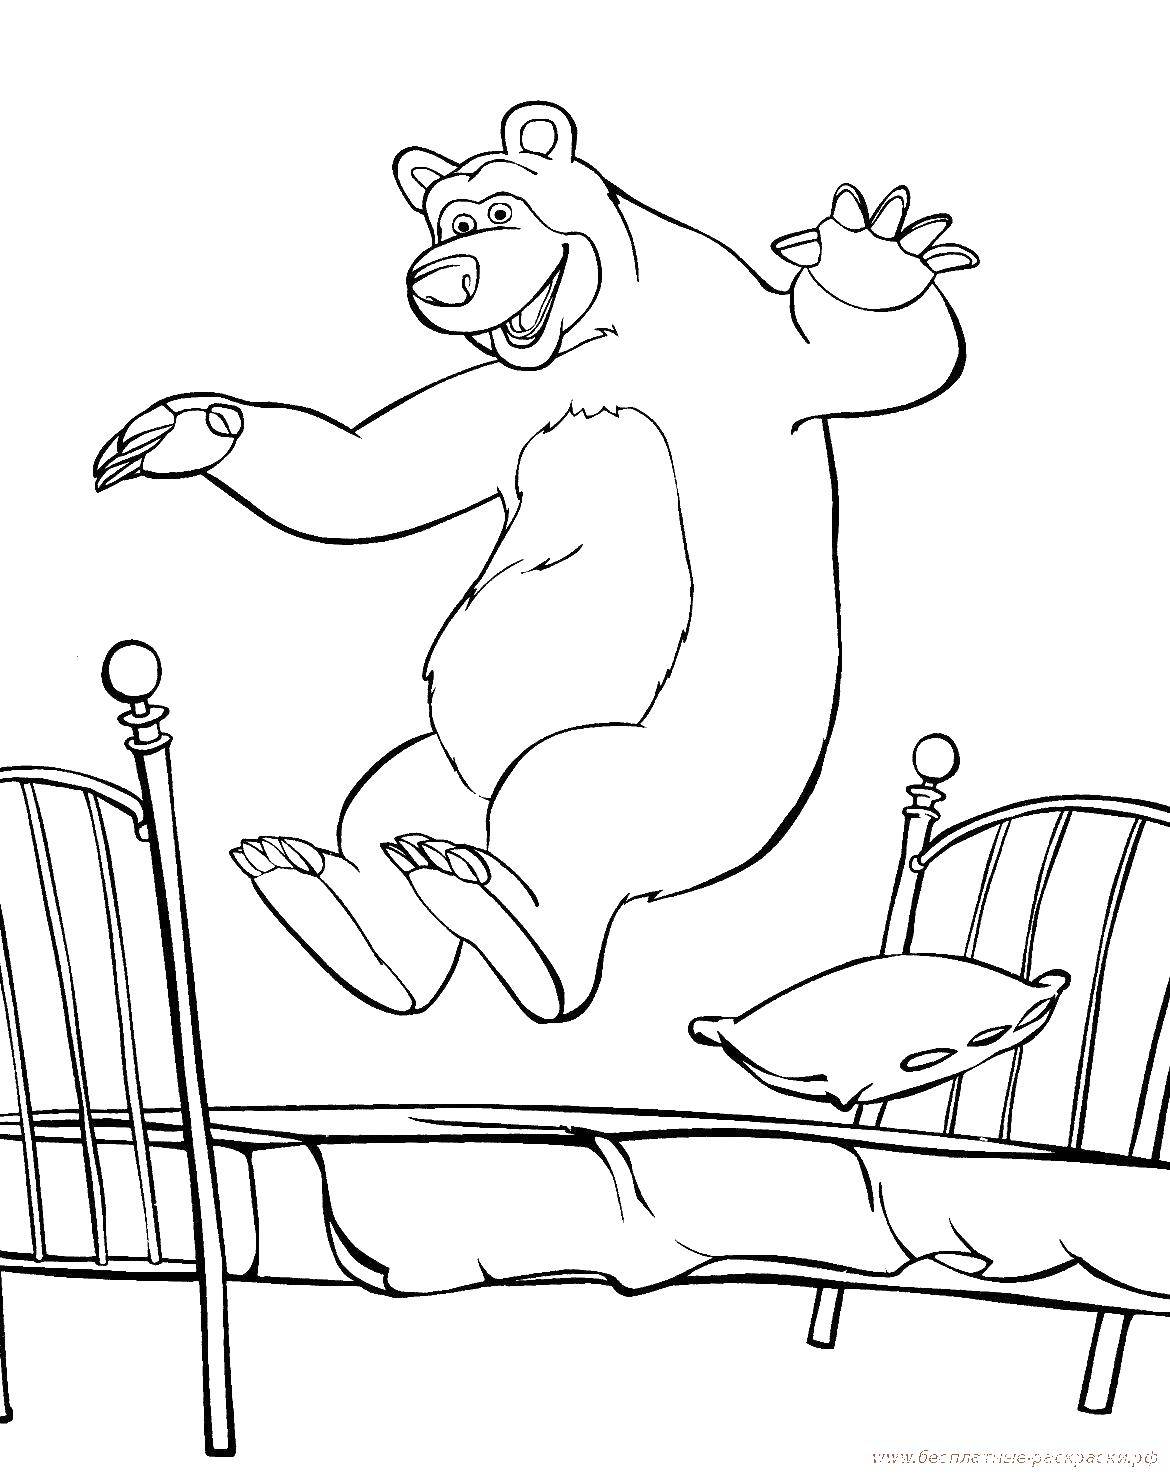 Coloring Bear jumping. Category The bed. Tags:  Cartoon character.